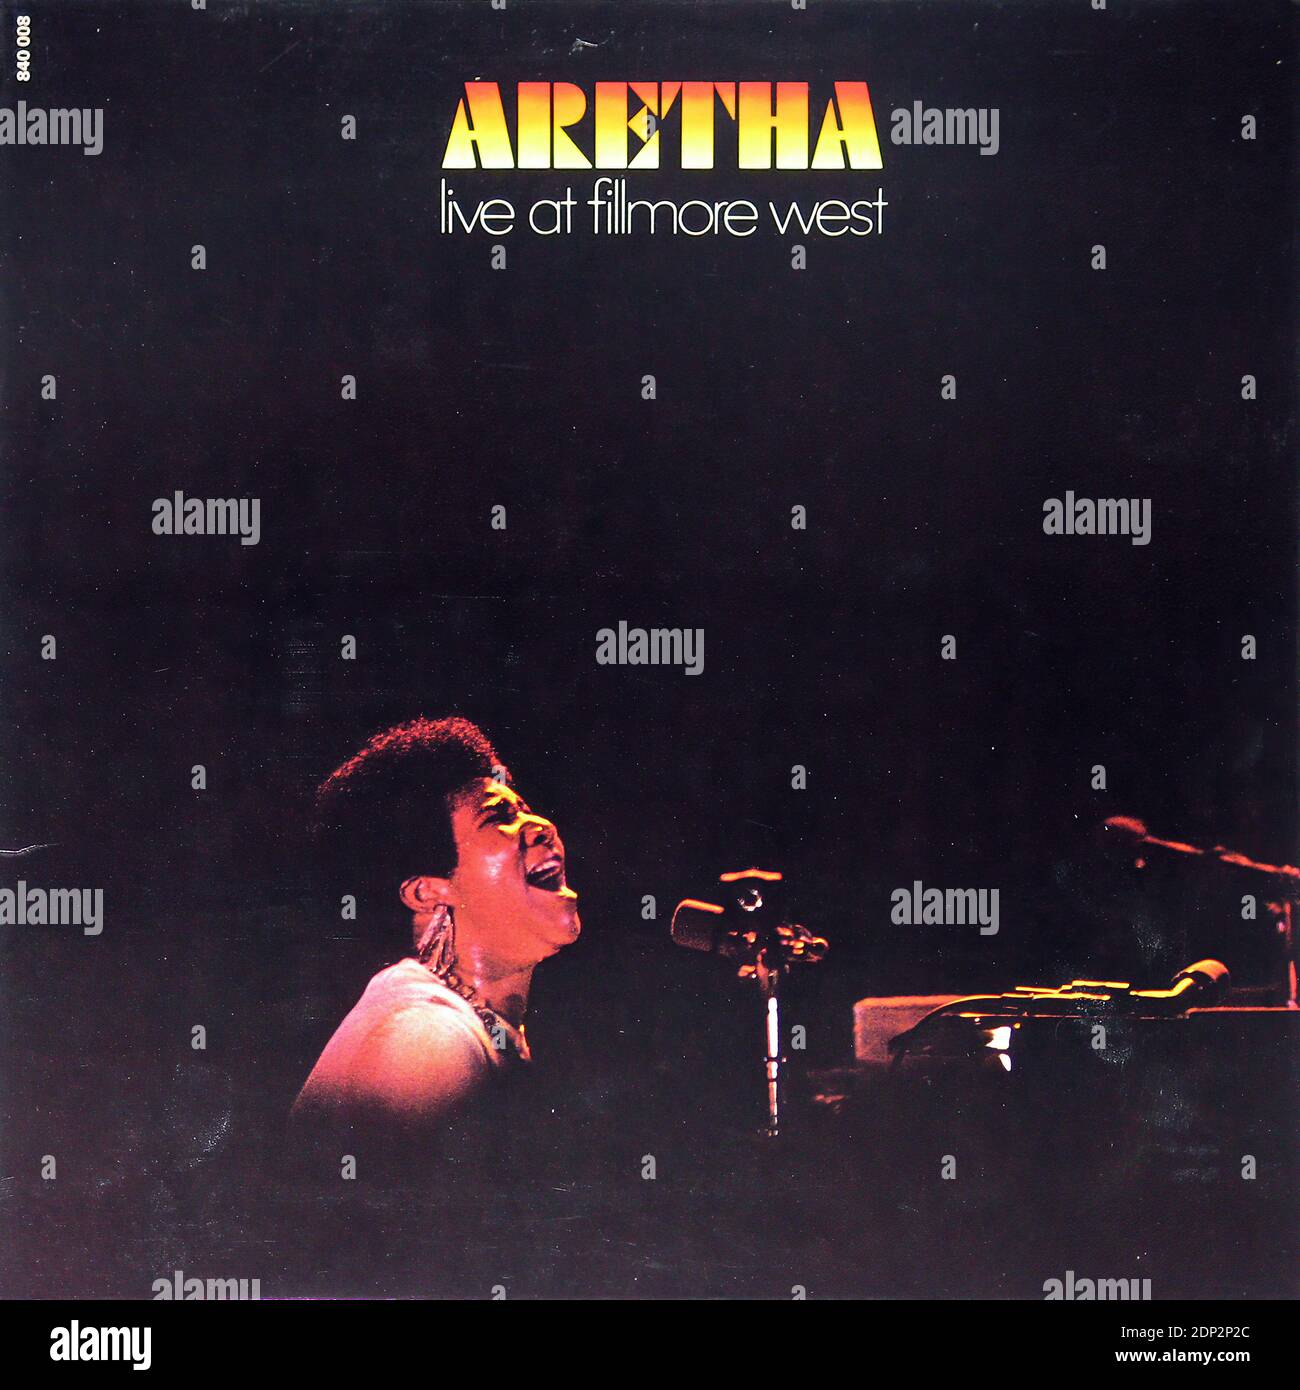 Aretha Franklin   Live at Fillmore West Ray Charles  - Vintage Vinyl Record Cover Stock Photo